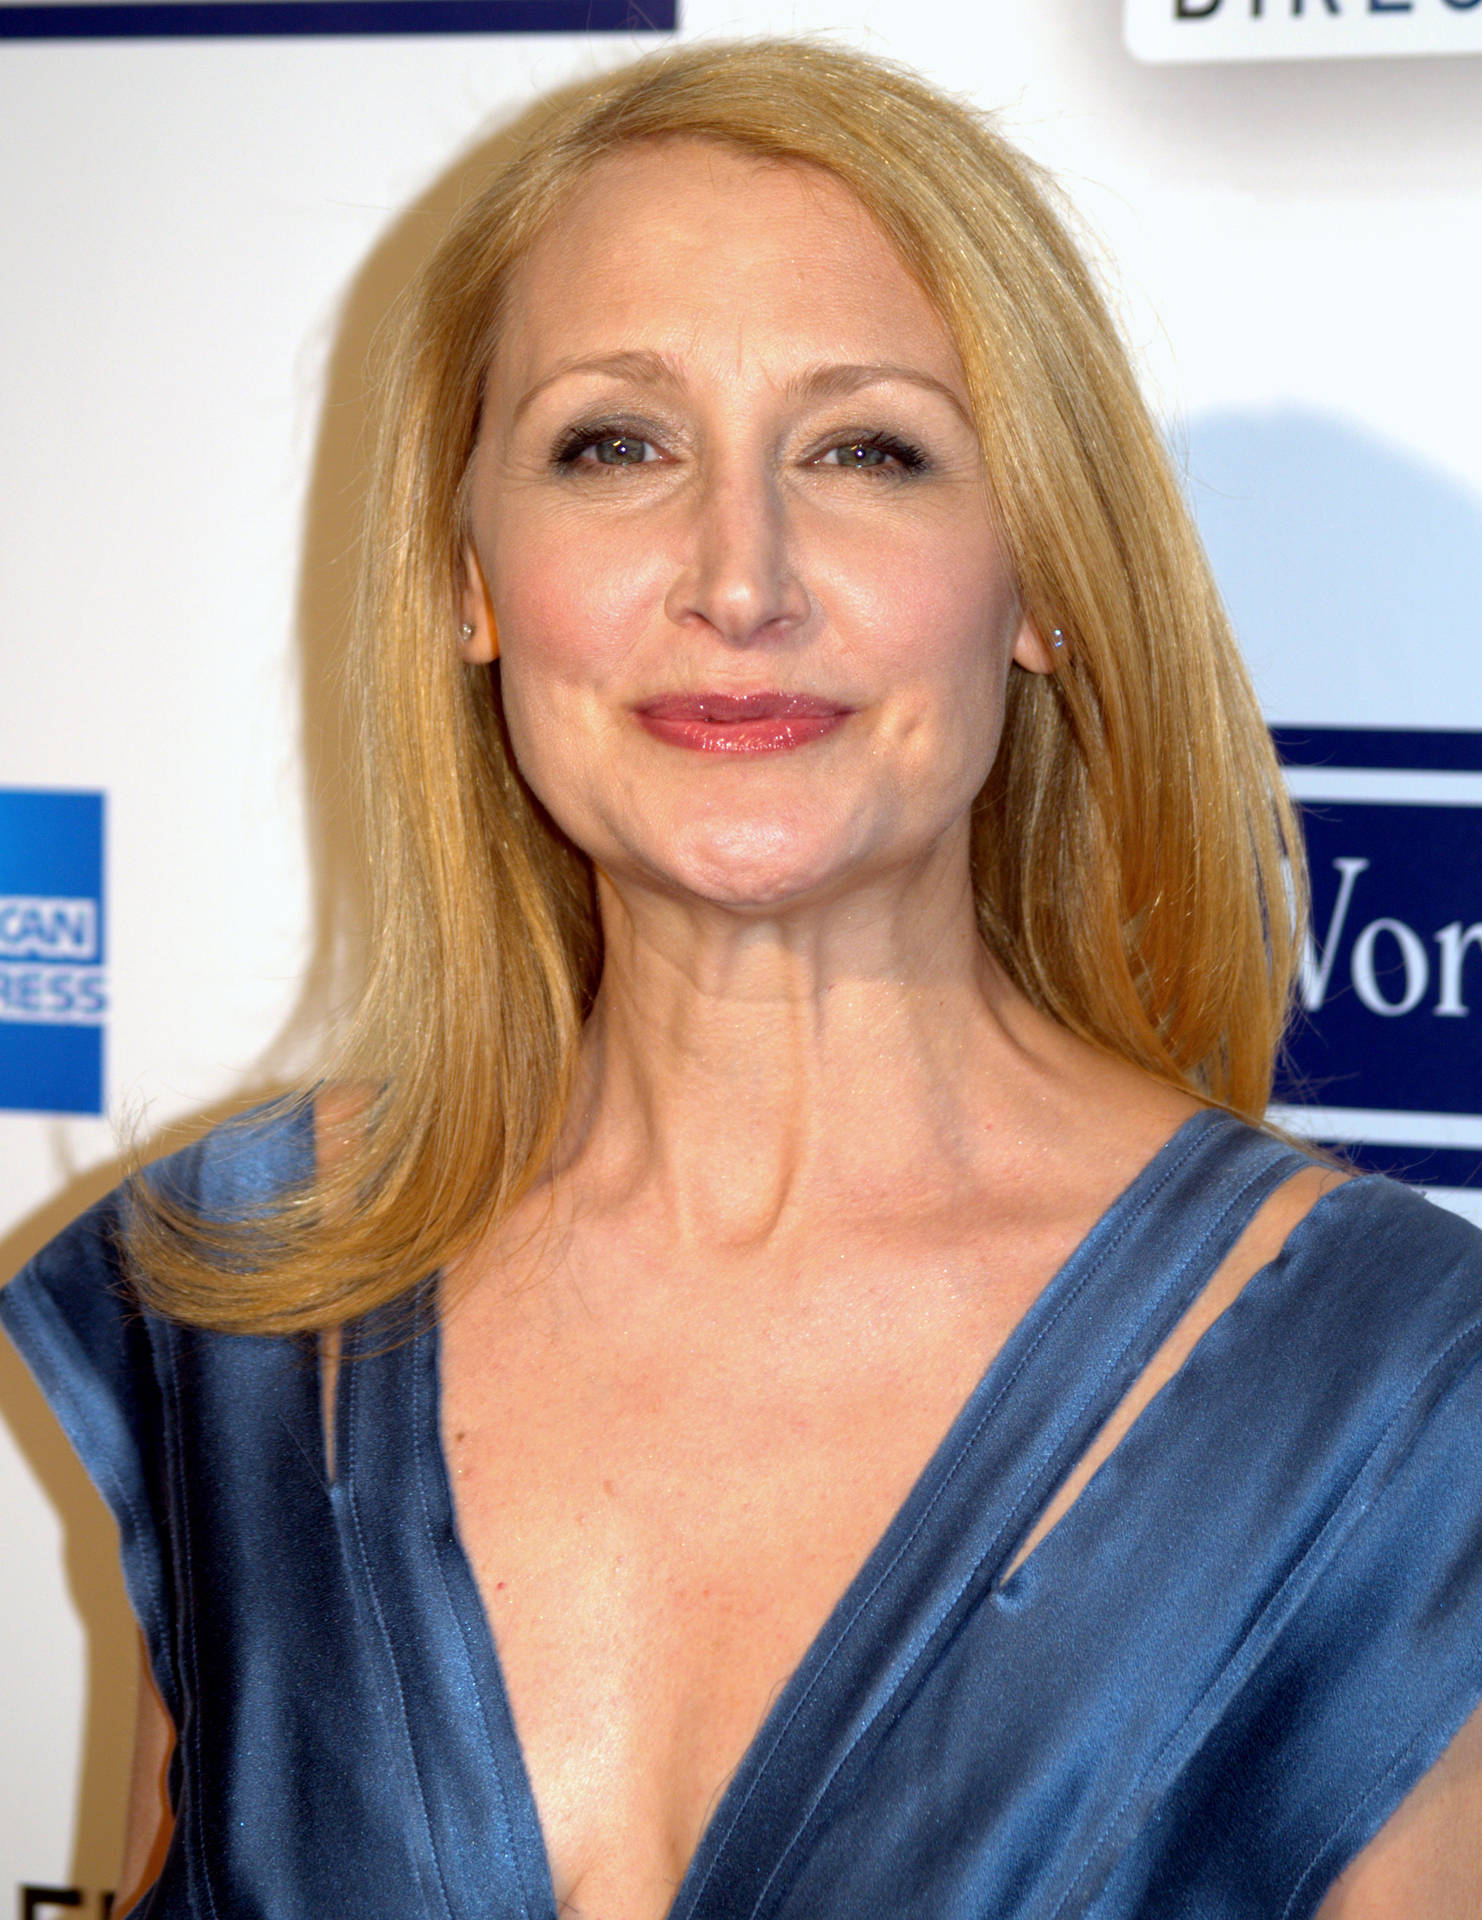 Patricia Clarkson At "Whatever Works" Screening Wallpaper